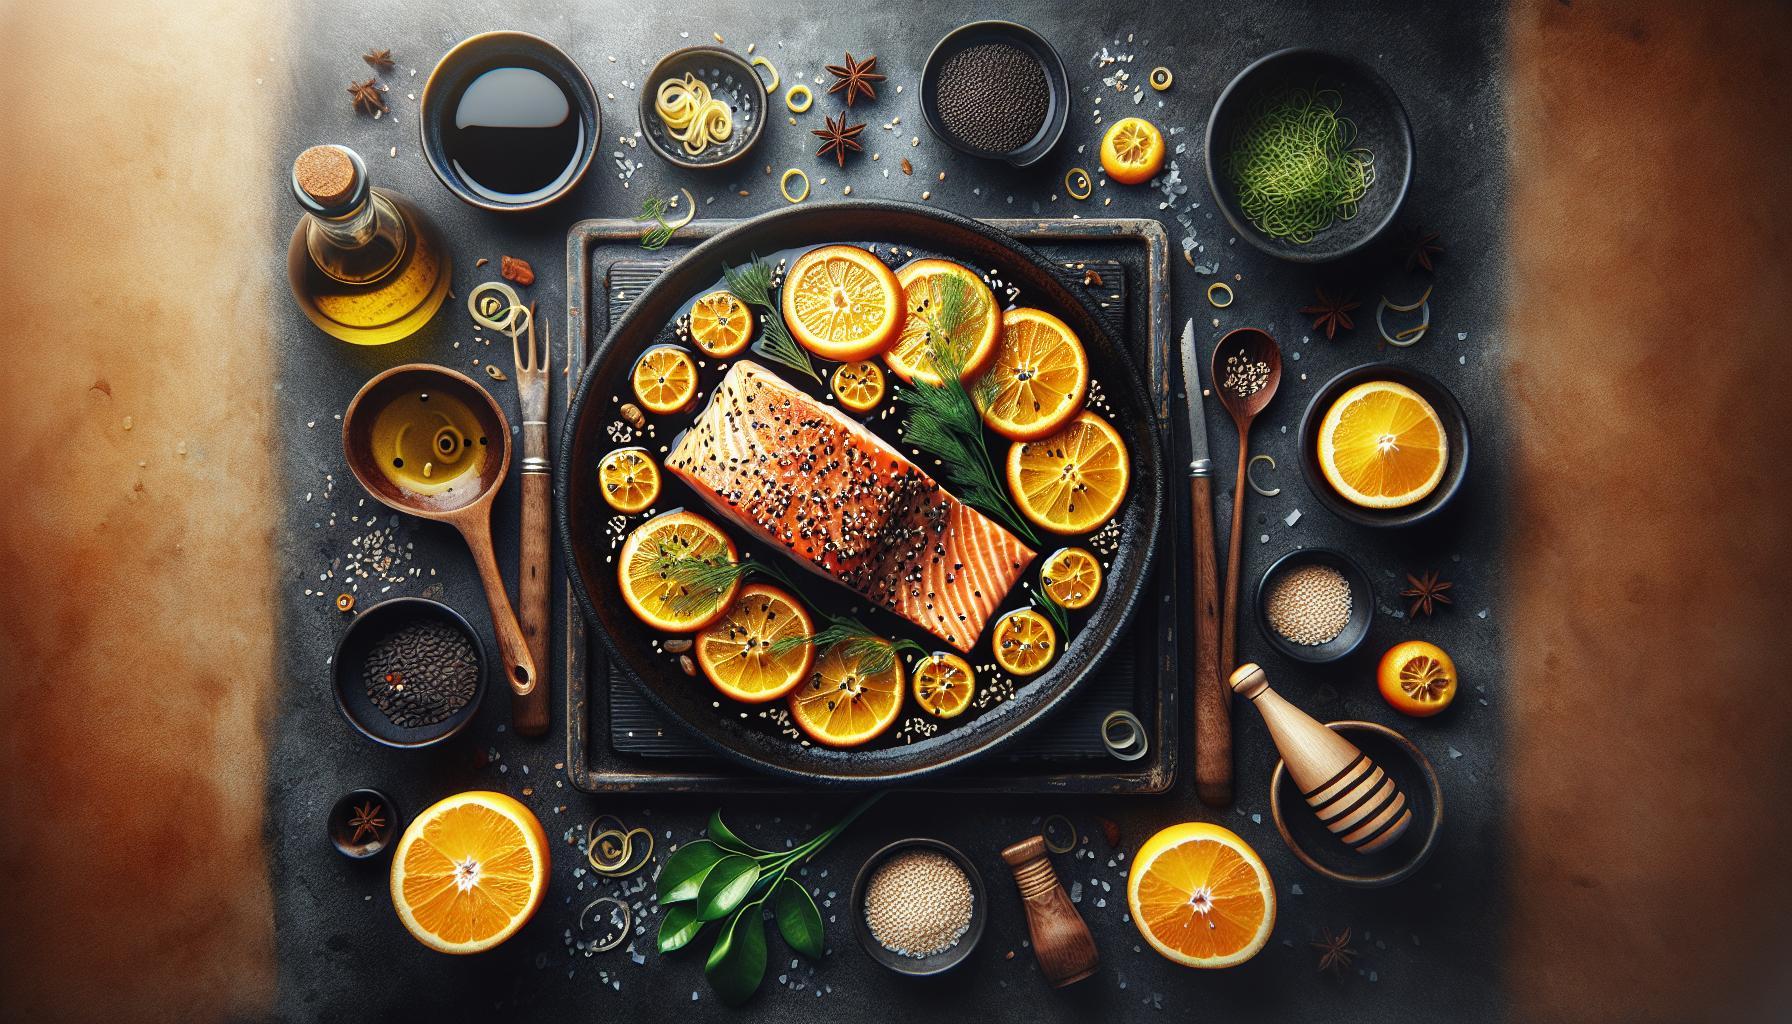 Sweet & Tangy Orange-Glazed Salmon with Toasted Sesame Seeds: A Seafood Delight!